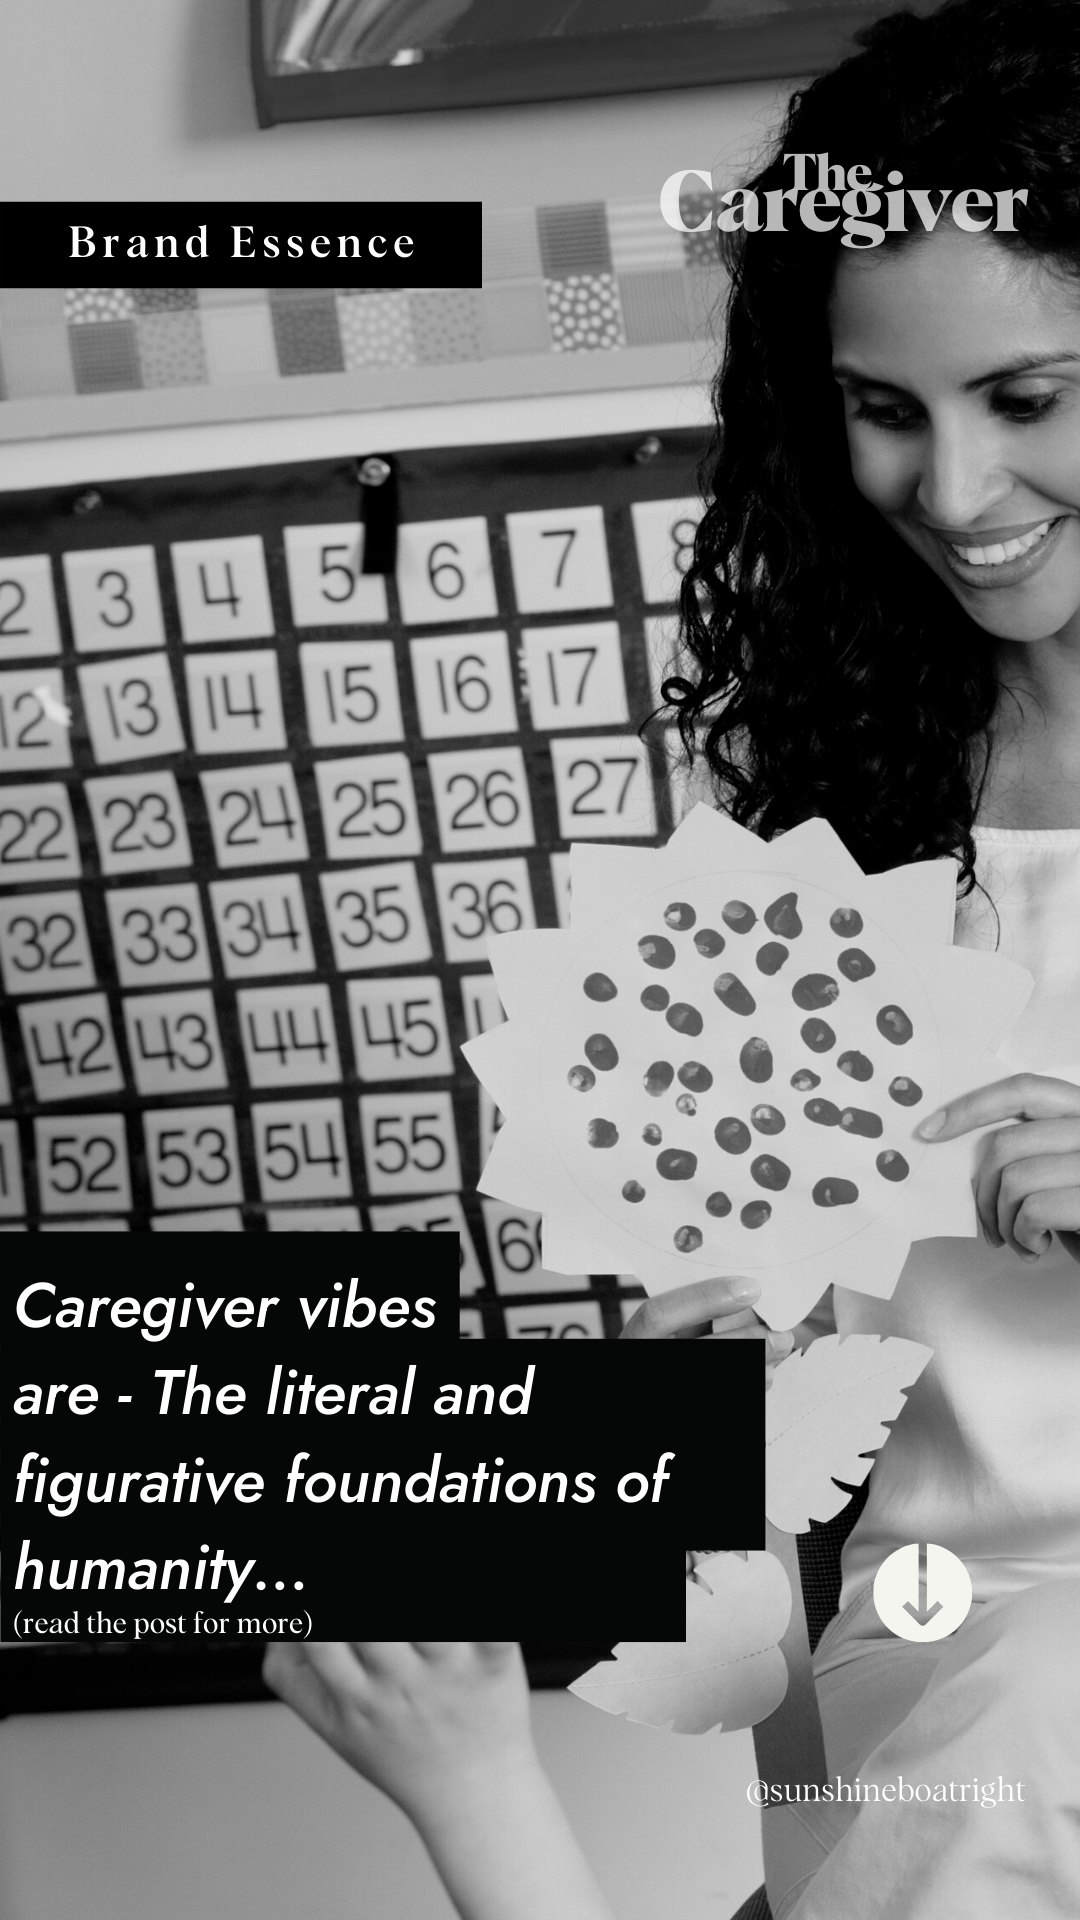 Brand Archetype Essence: Caregiver vibes are the literal and figurative foundations of humanity.